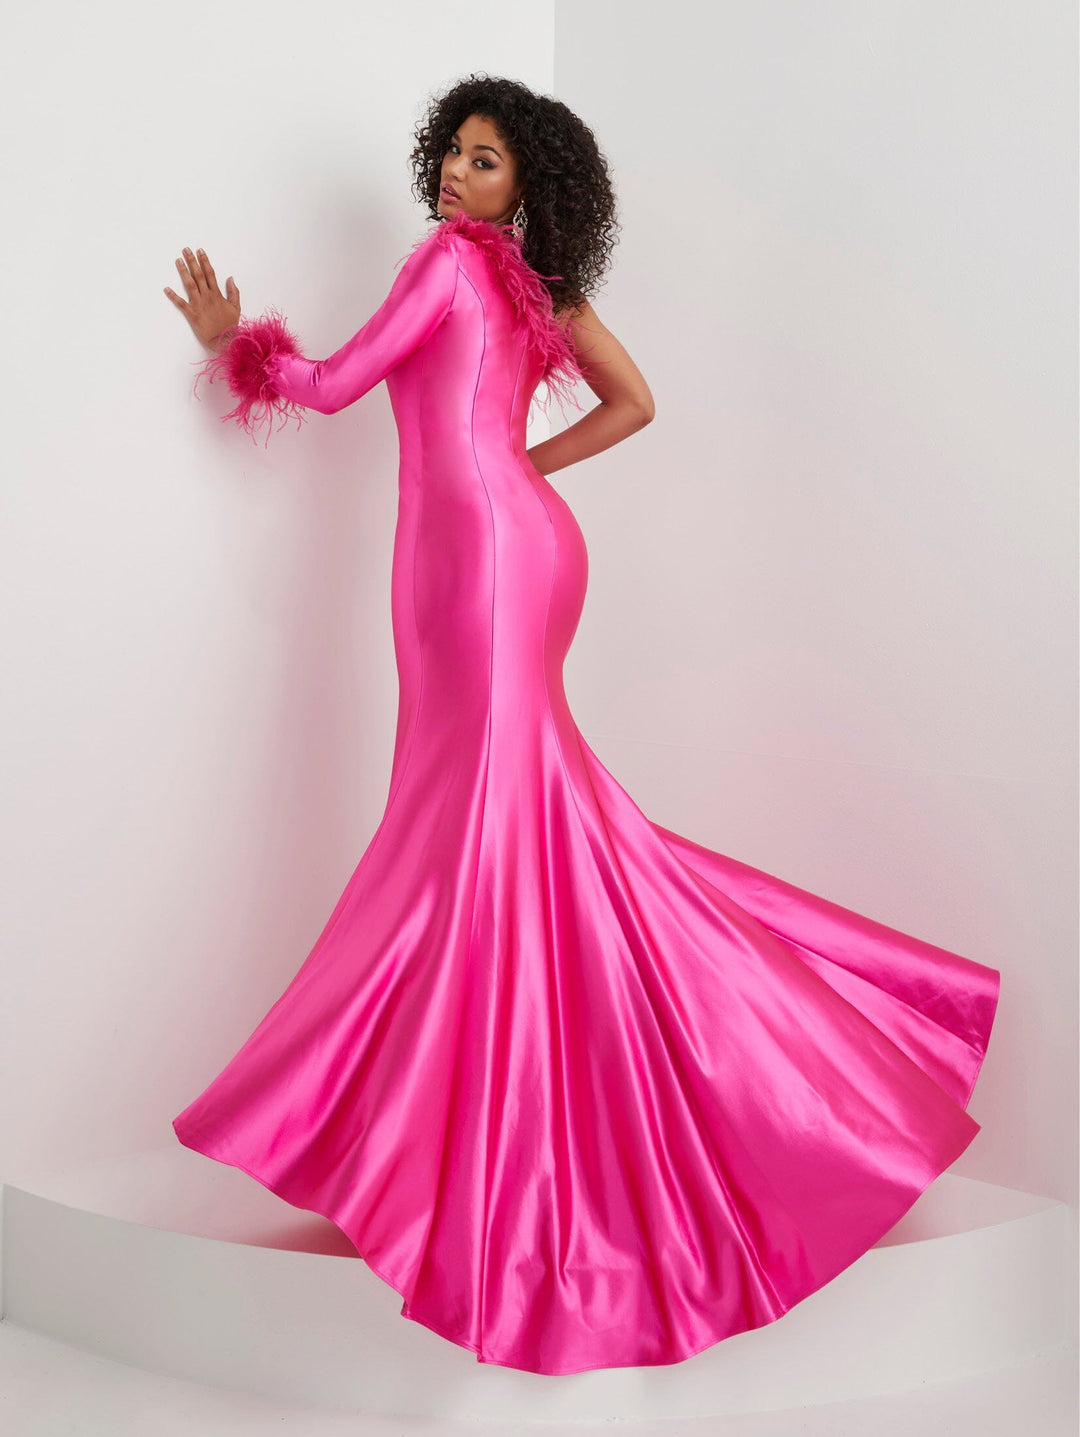 Feather One Shoulder Long Sleeve Gown by Panoply 14139